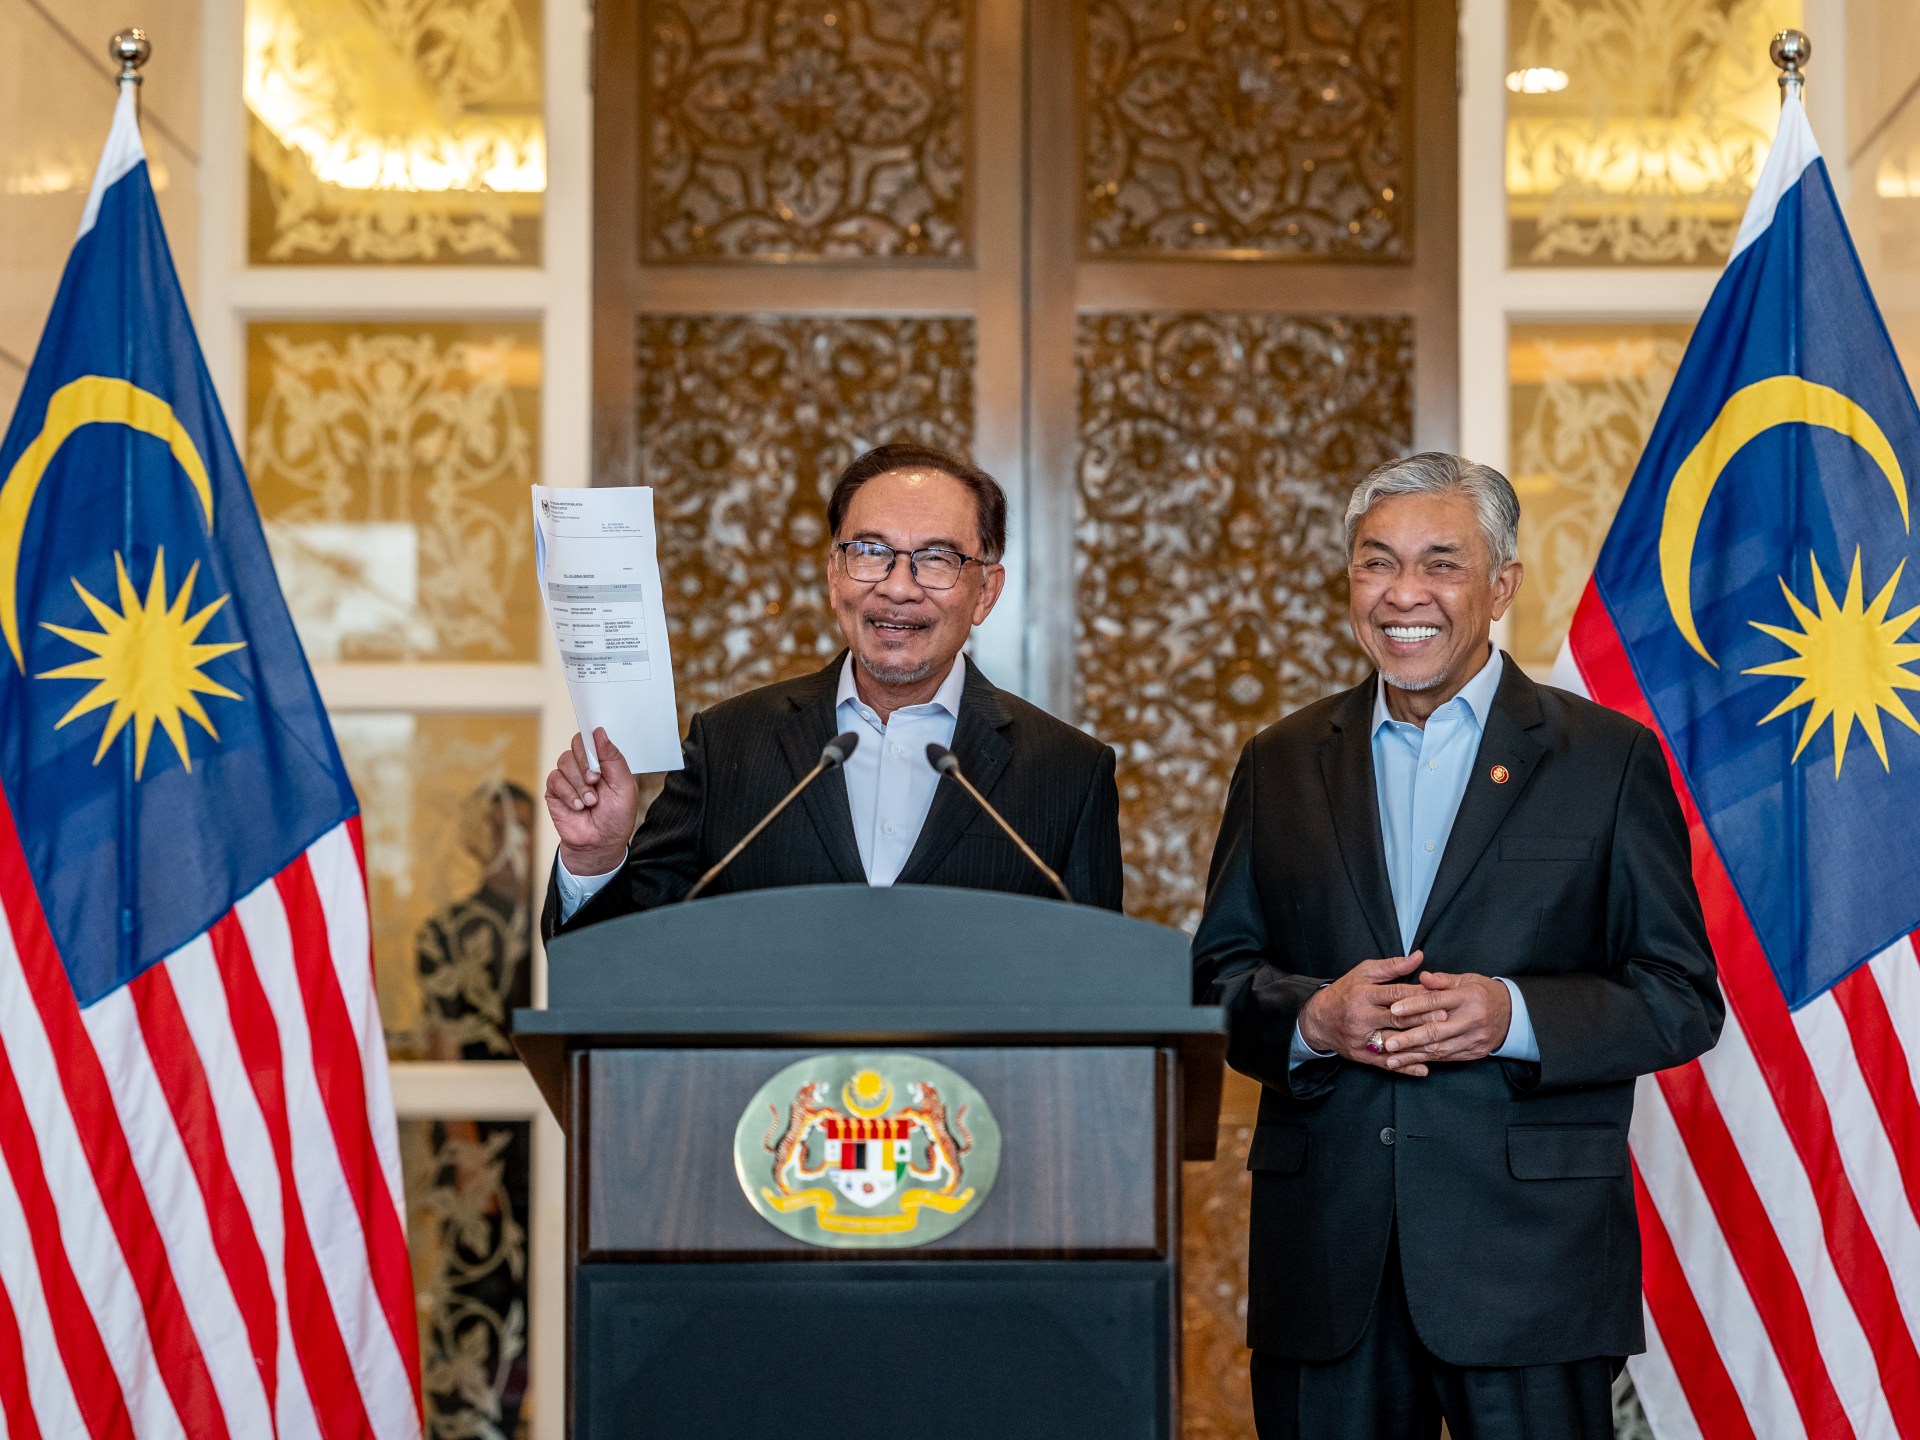 Malaysia’s Anwar Ibrahim revamps cabinet as voters worry about economy | Politics News #Malaysias #Anwar #Ibrahim #revamps #cabinet #voters #worry #economy #Politics #News